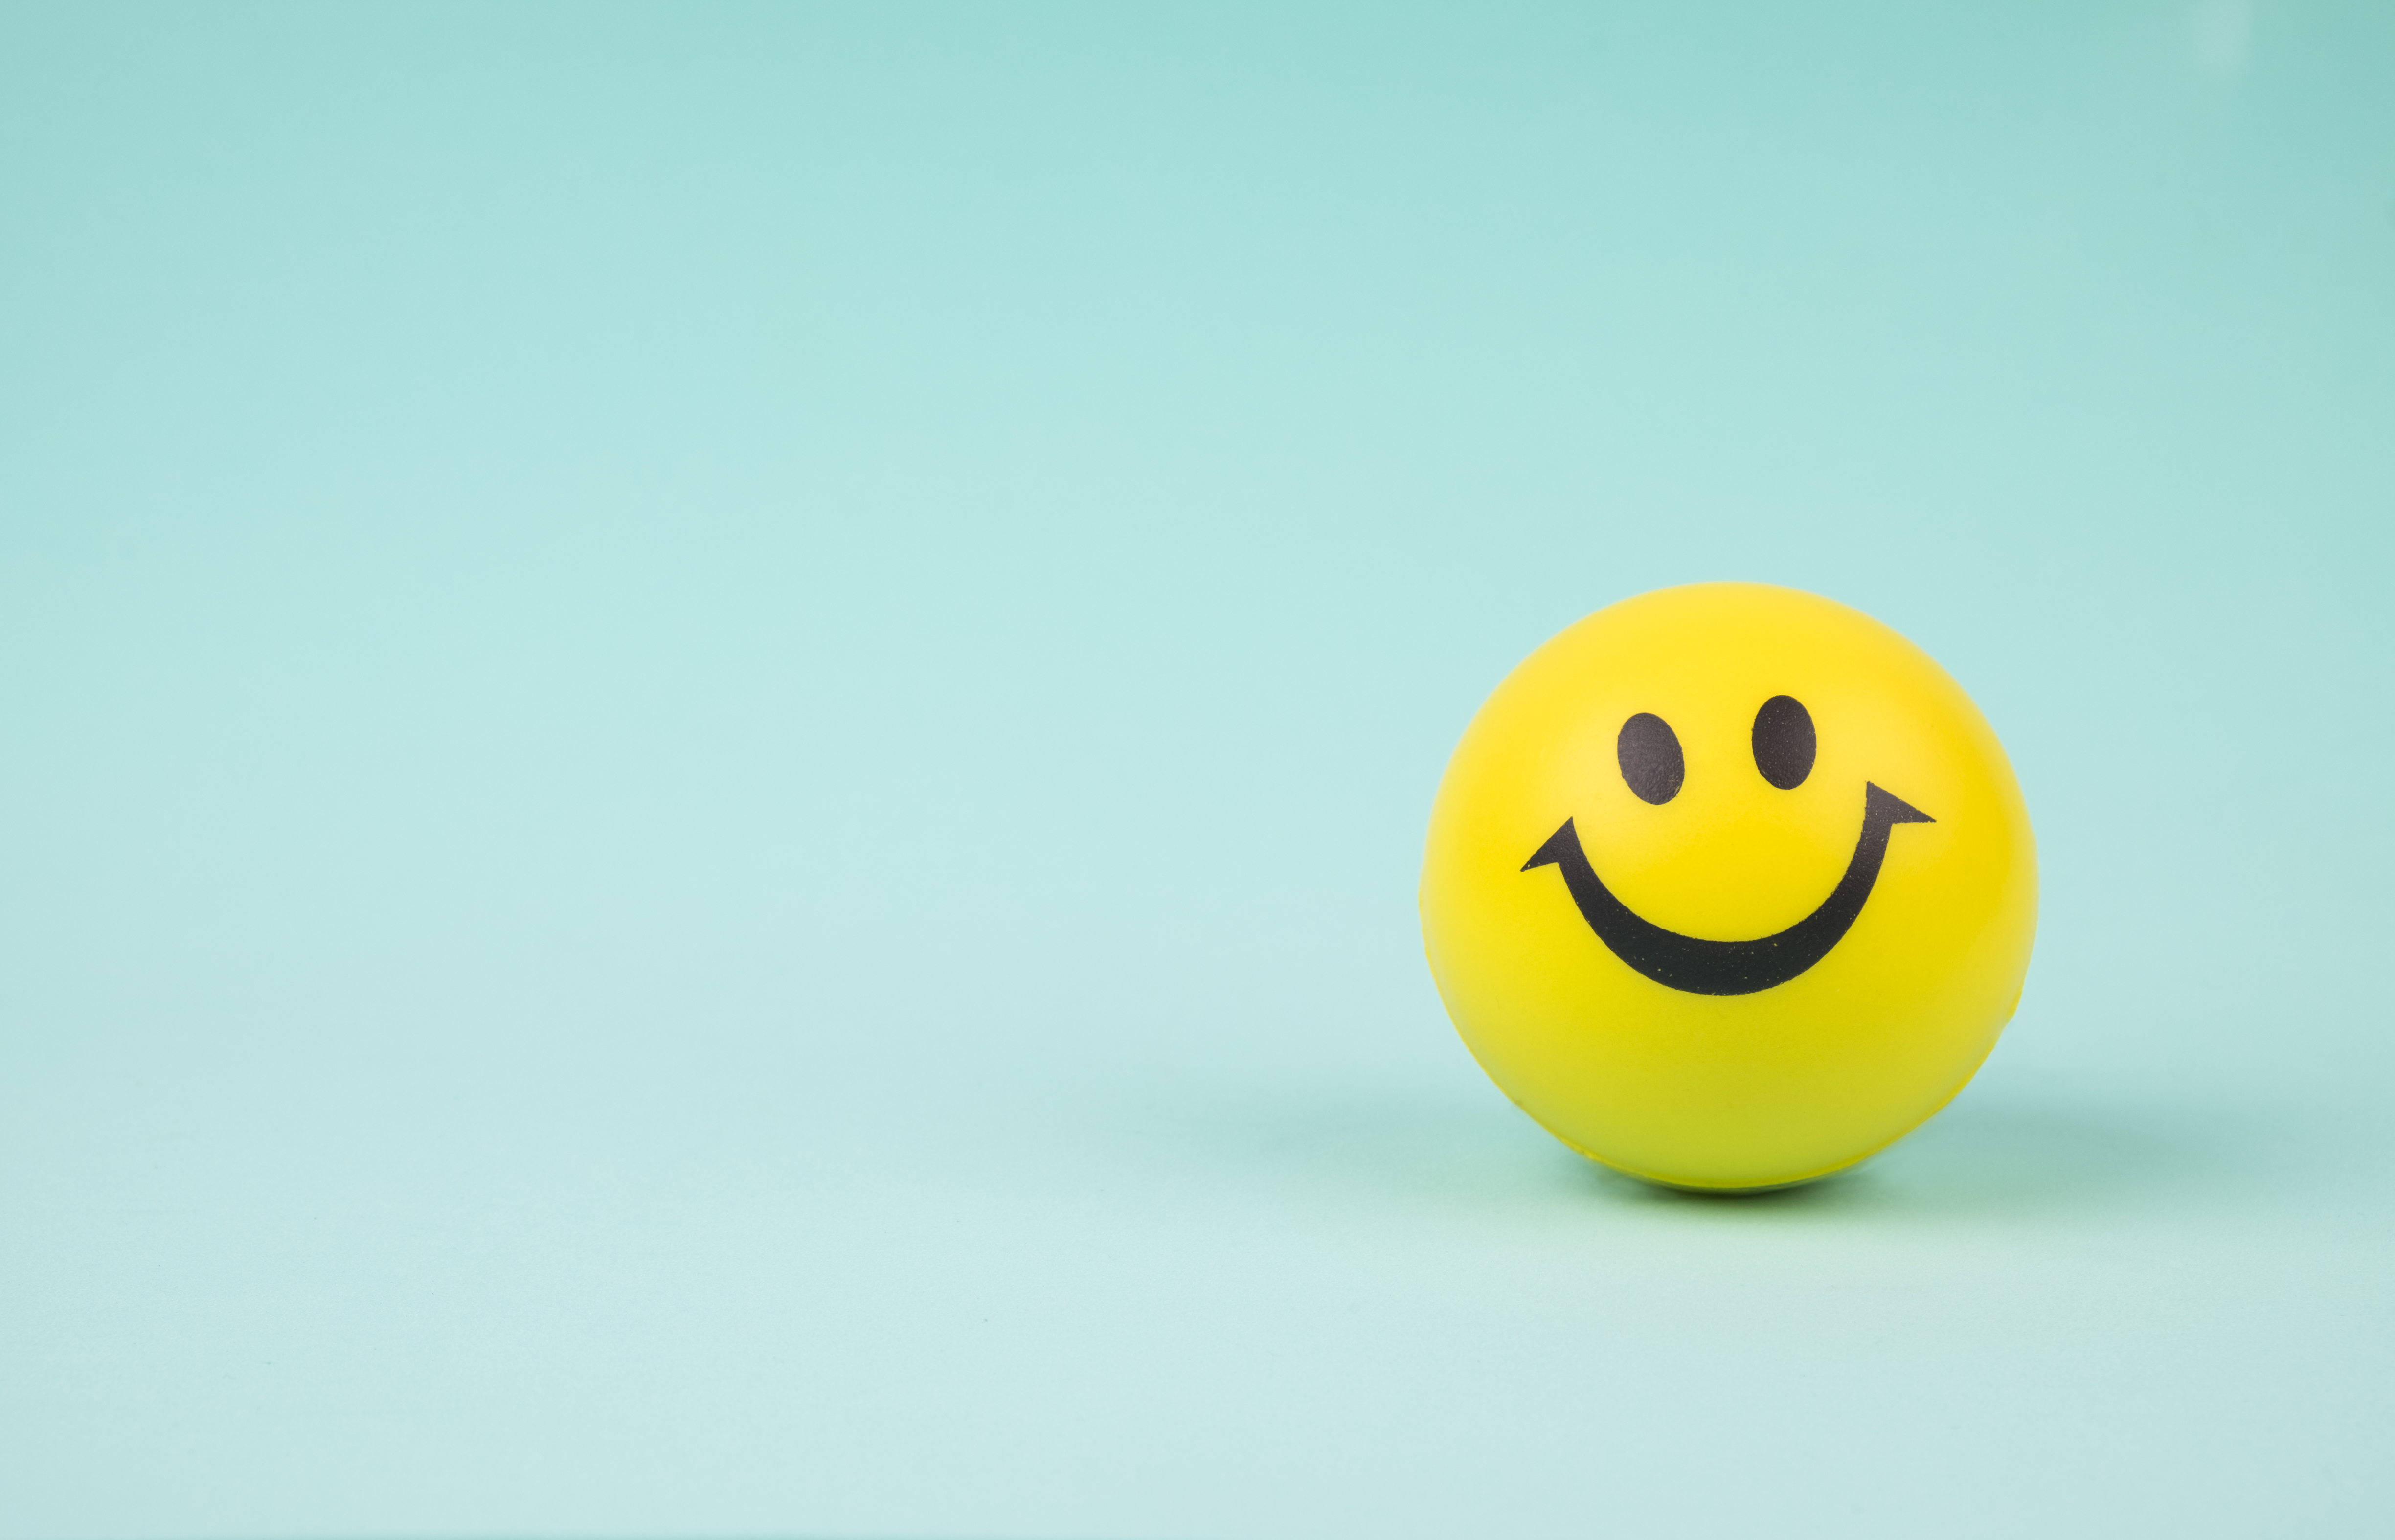 Yellow smiley face stress ball on an ocean blue background.